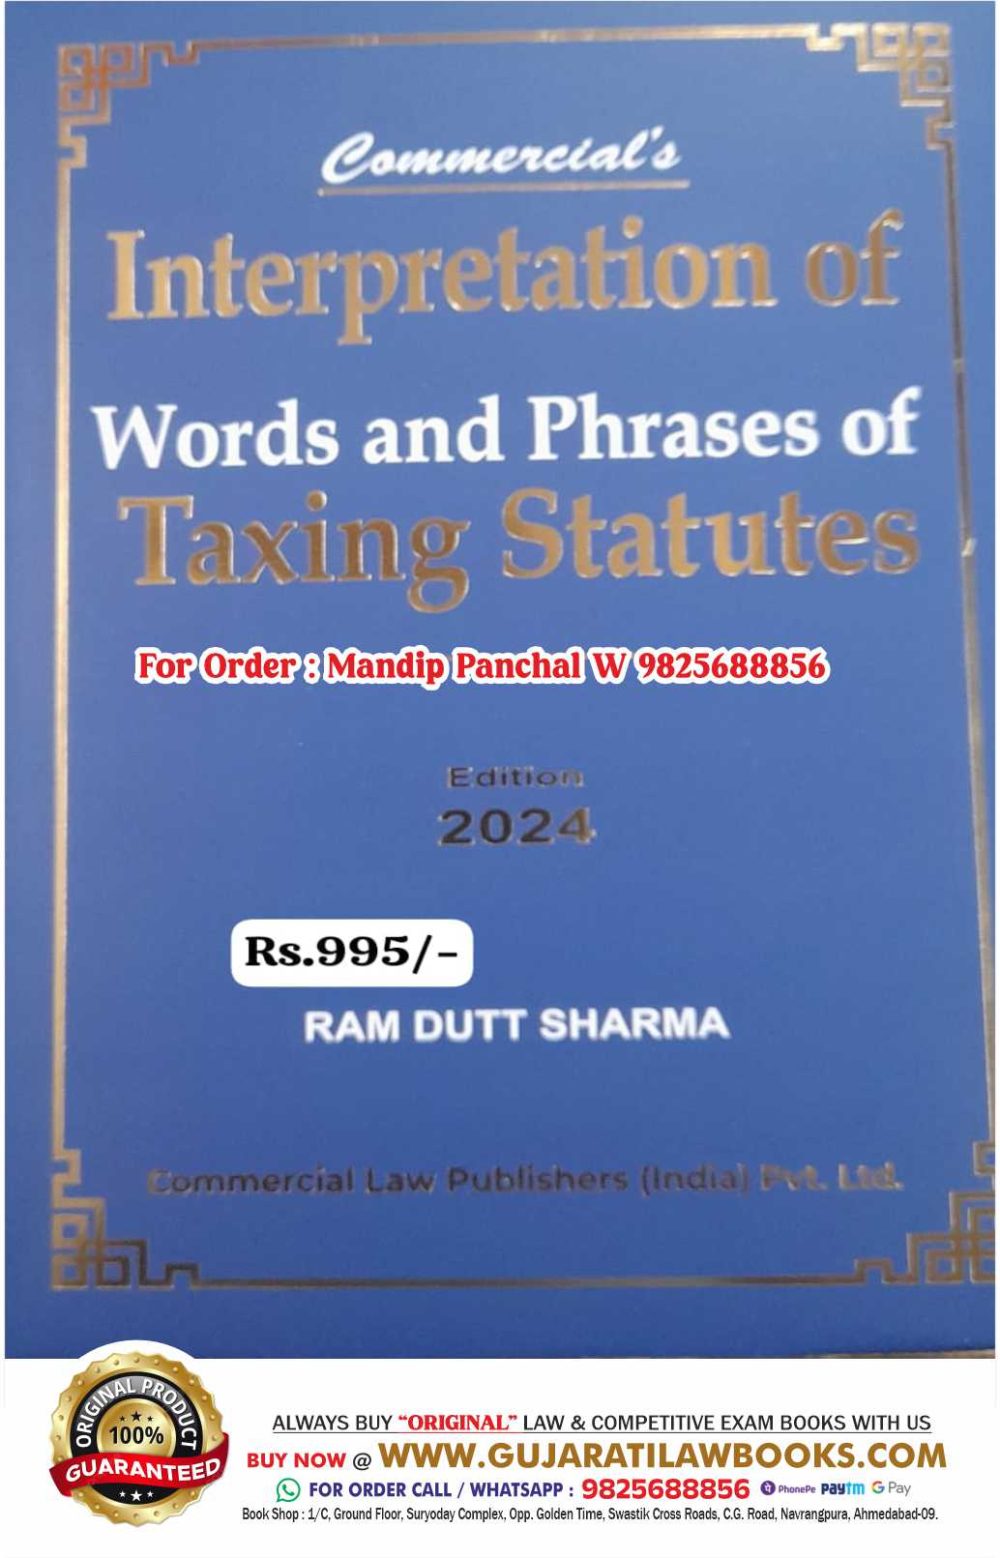 Commercial's Interpretation of Words and Phrases of Taxing Statutes - Latest 2024 Edition by Ram Dutt Sharma